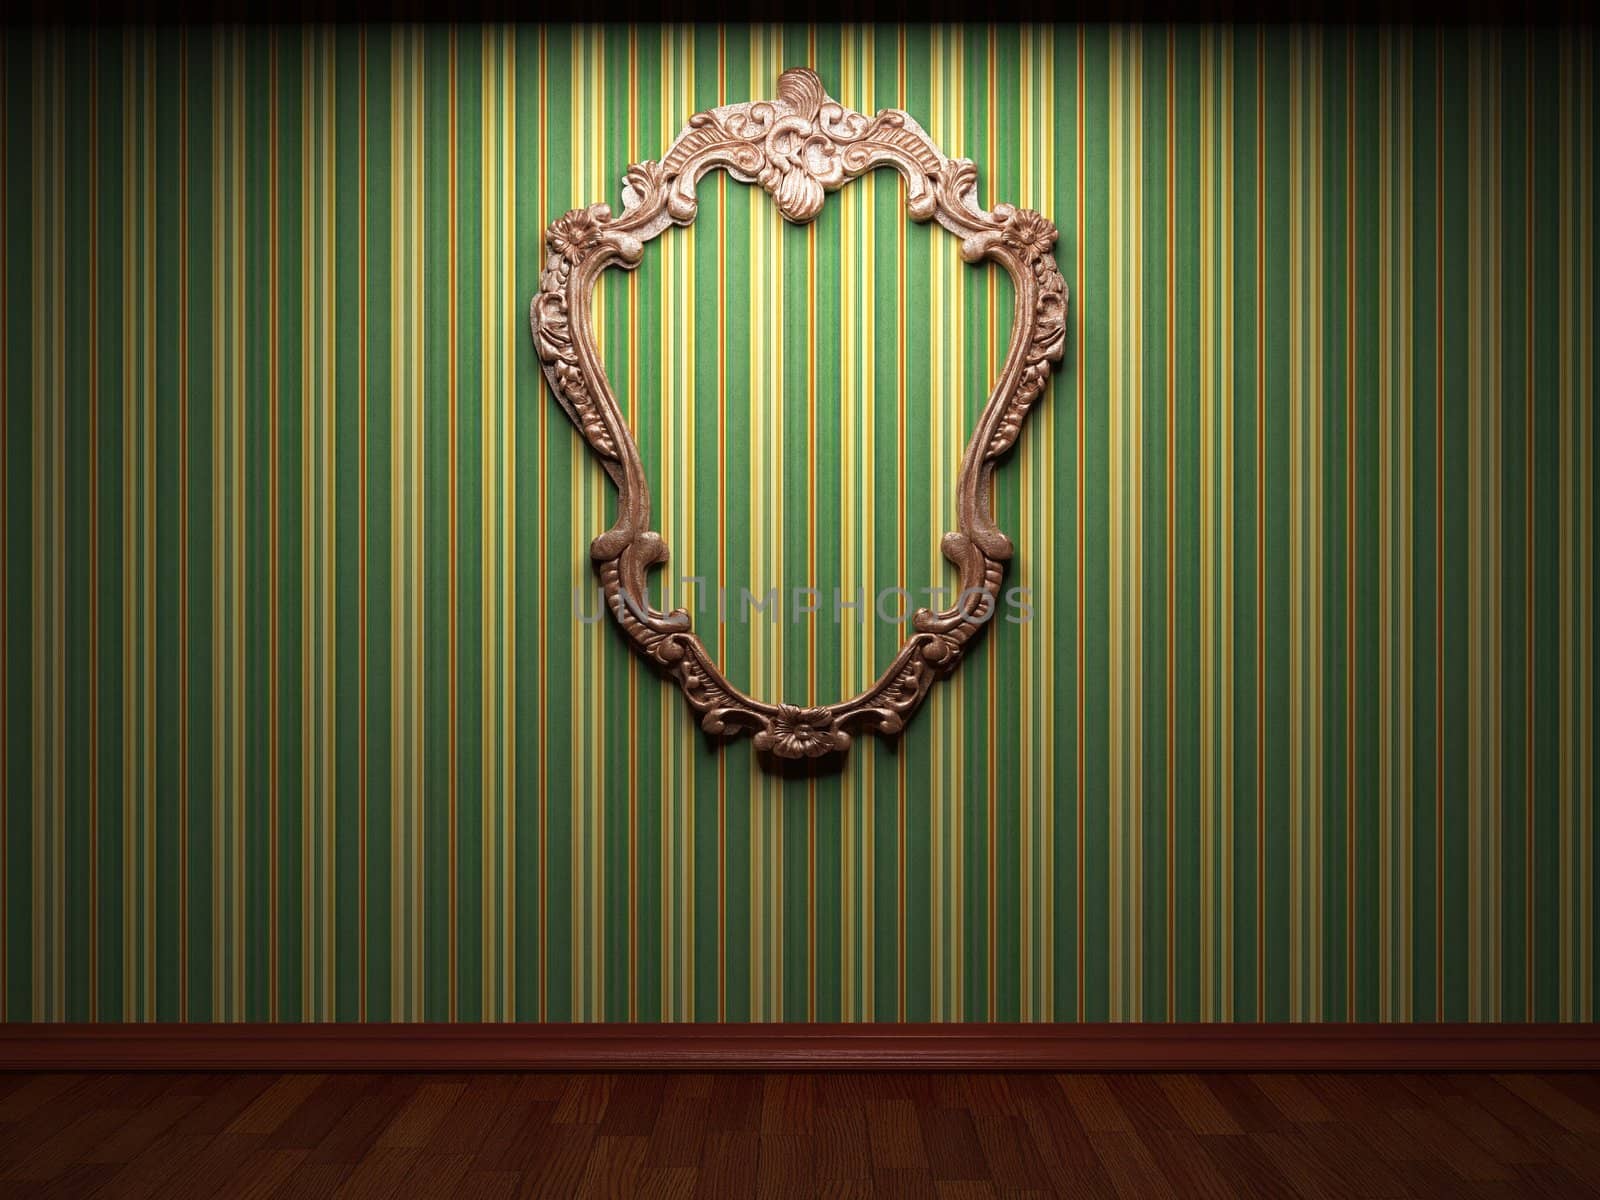 illuminated fabric wall and frame made in 3D